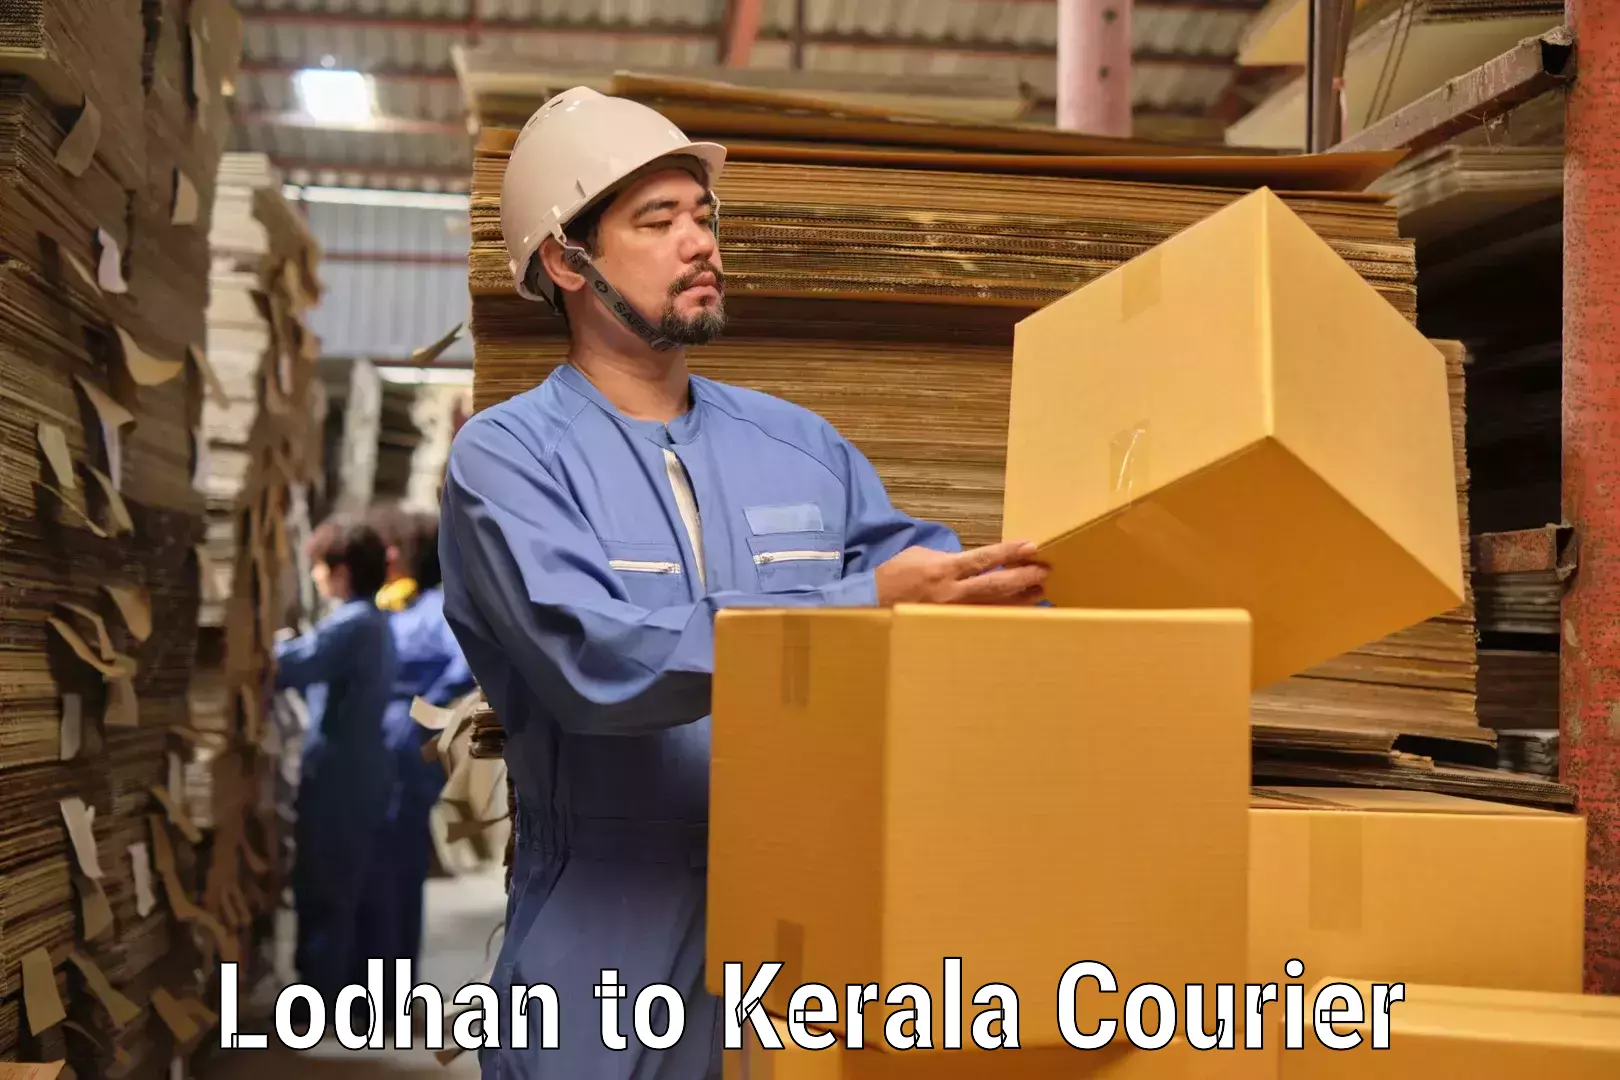 Express package services Lodhan to Cochin Port Kochi